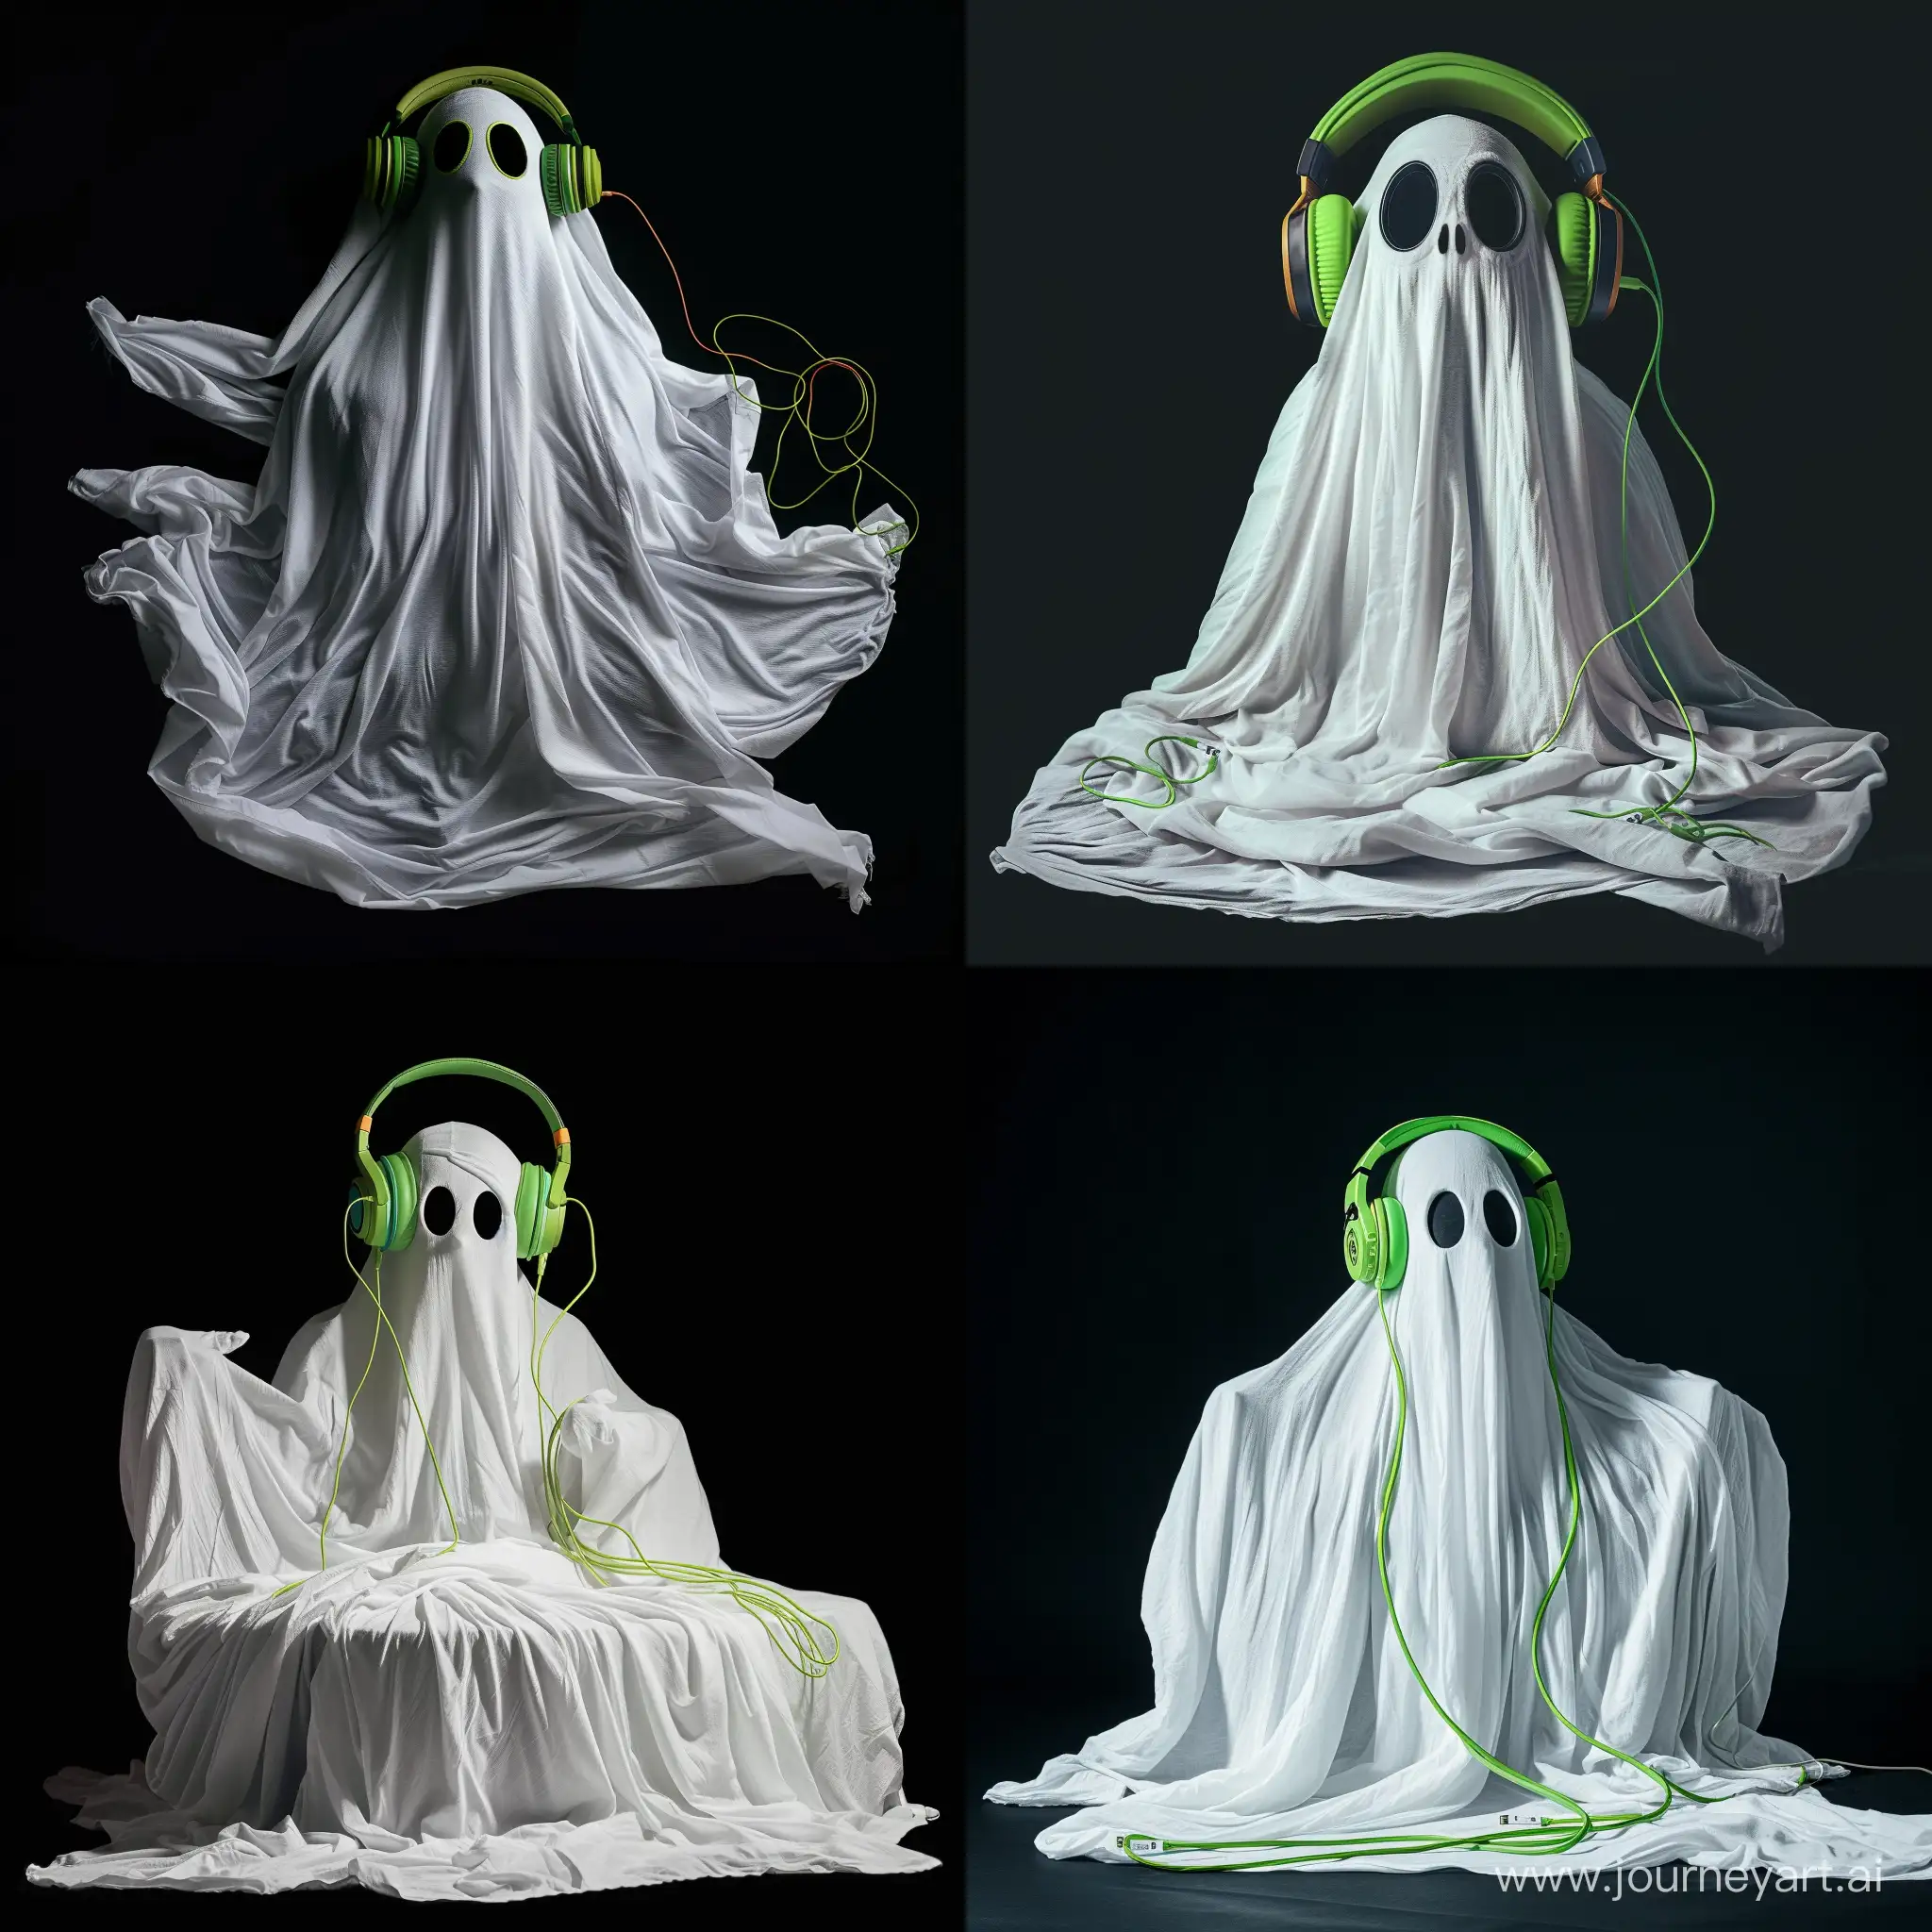 Friendly-Ghost-with-Green-Headphones-on-Black-Background